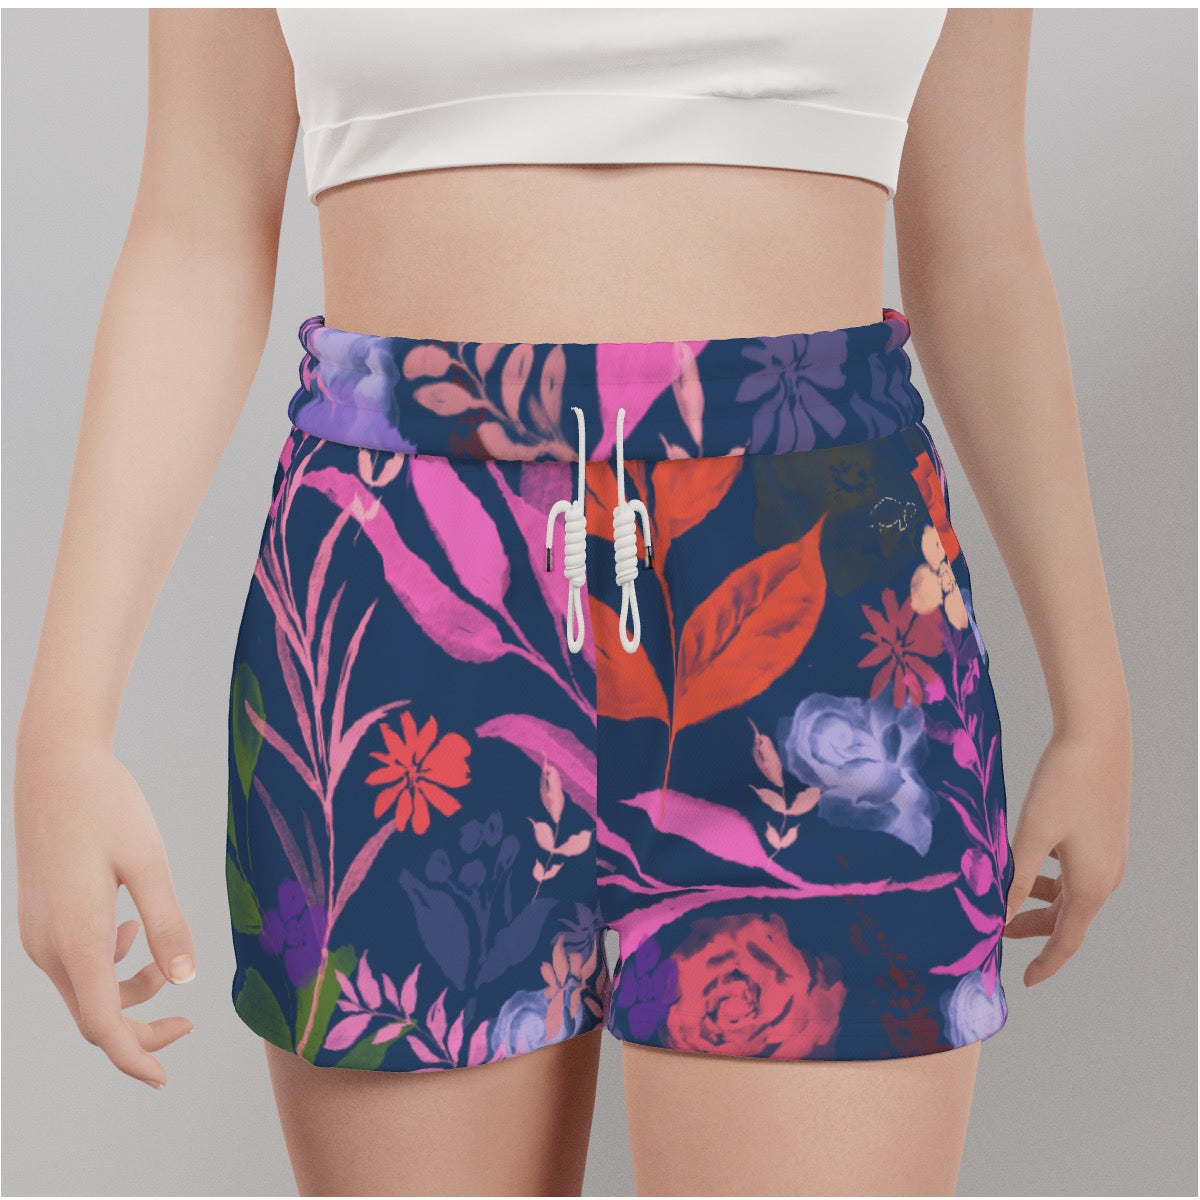 Multicolor Flowers Blue Women's Casual Shorts. Design hand-painted by the Designer Maria Alejandra E